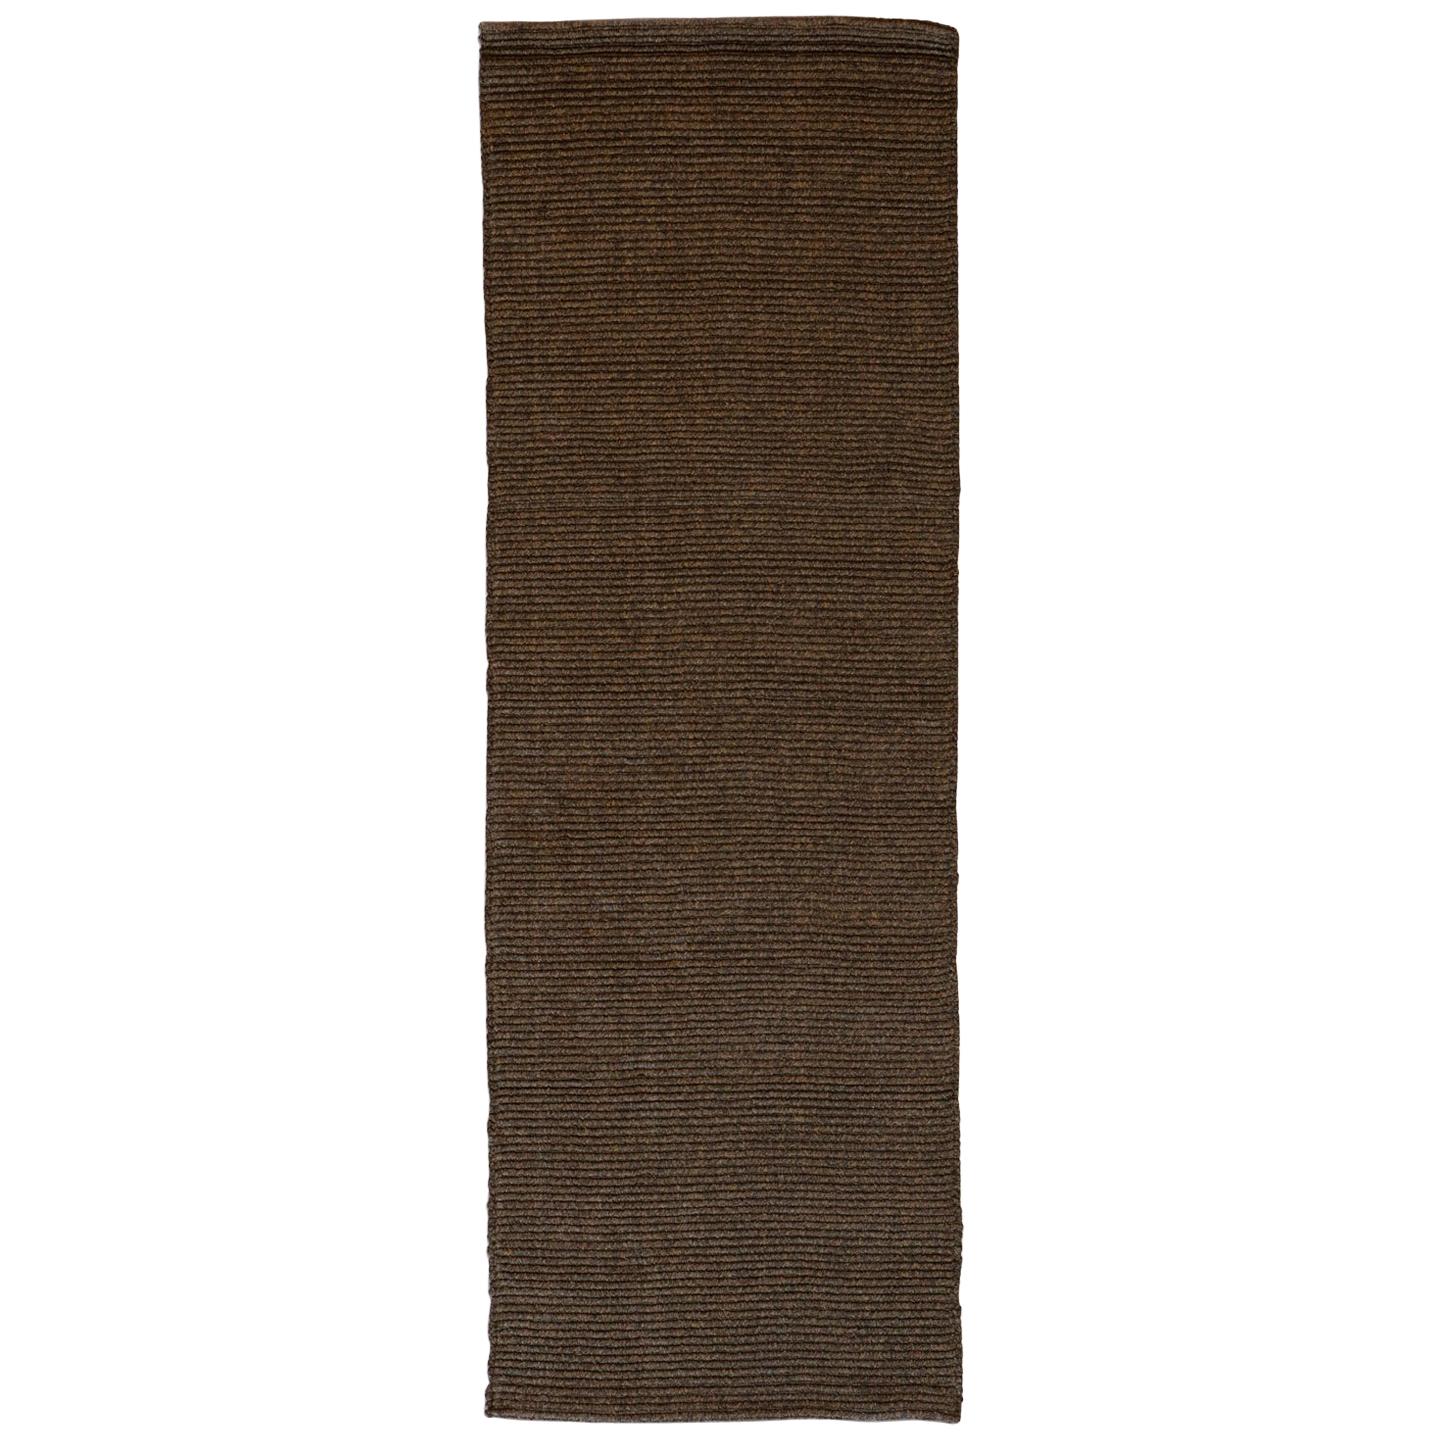 Resistant In & Out Spring Trend Brown Rug by Deanna Comellini In Stock 70x200 cm